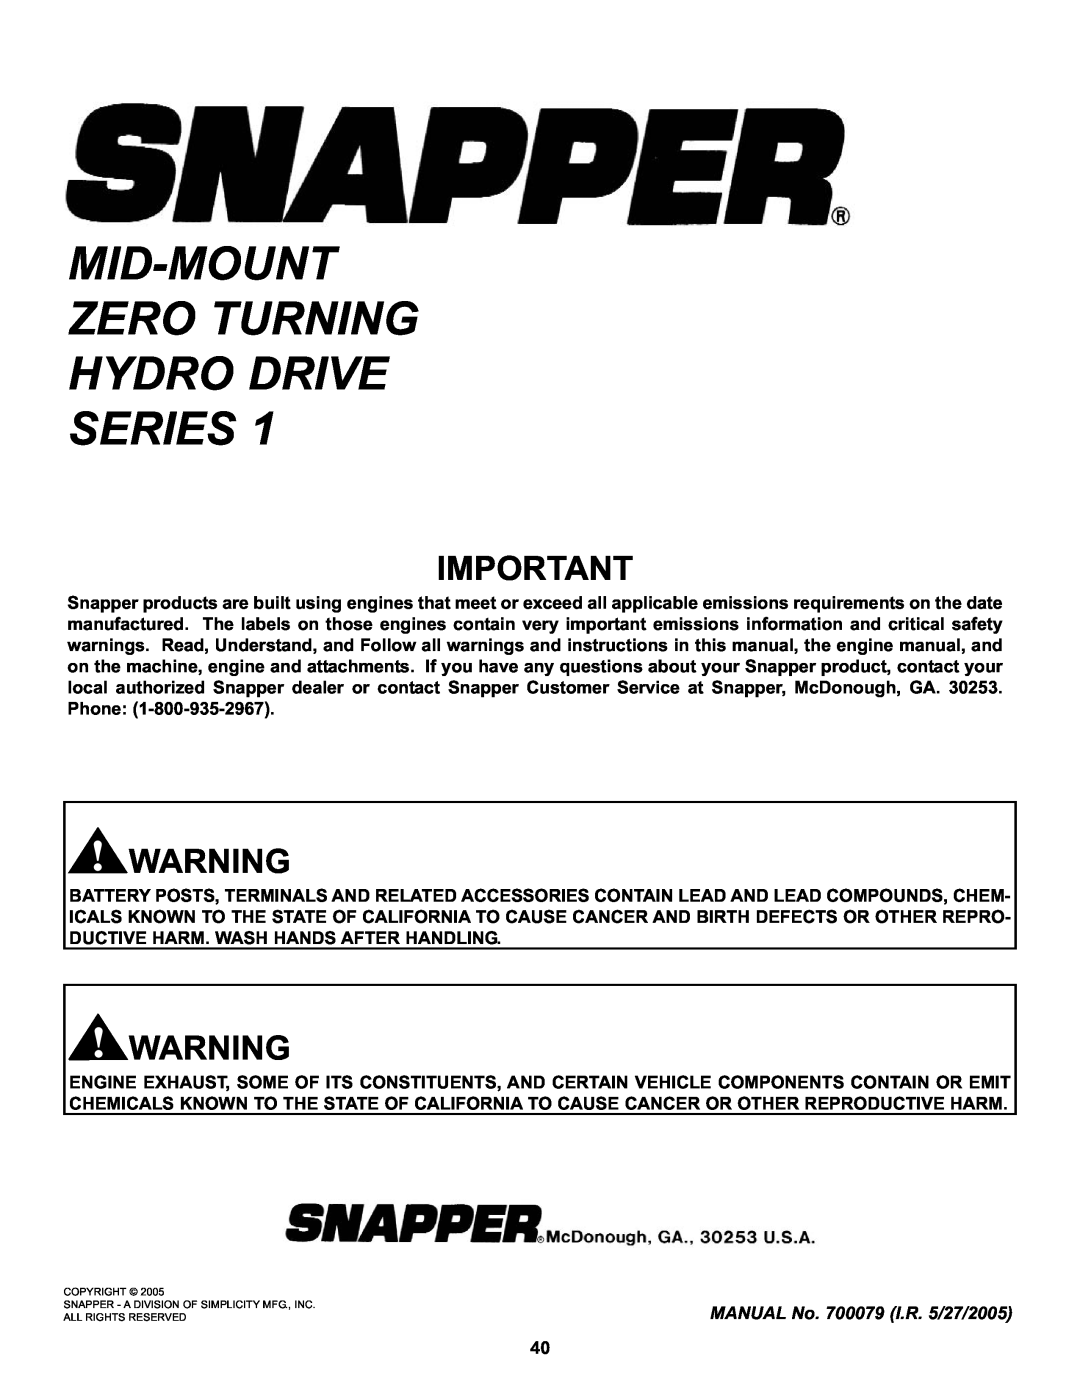 Snapper HZT21481BV Mid-Mount Zero Turning Hydro Drive Series, MANUAL No. 700079 I.R. 5/27/2005 